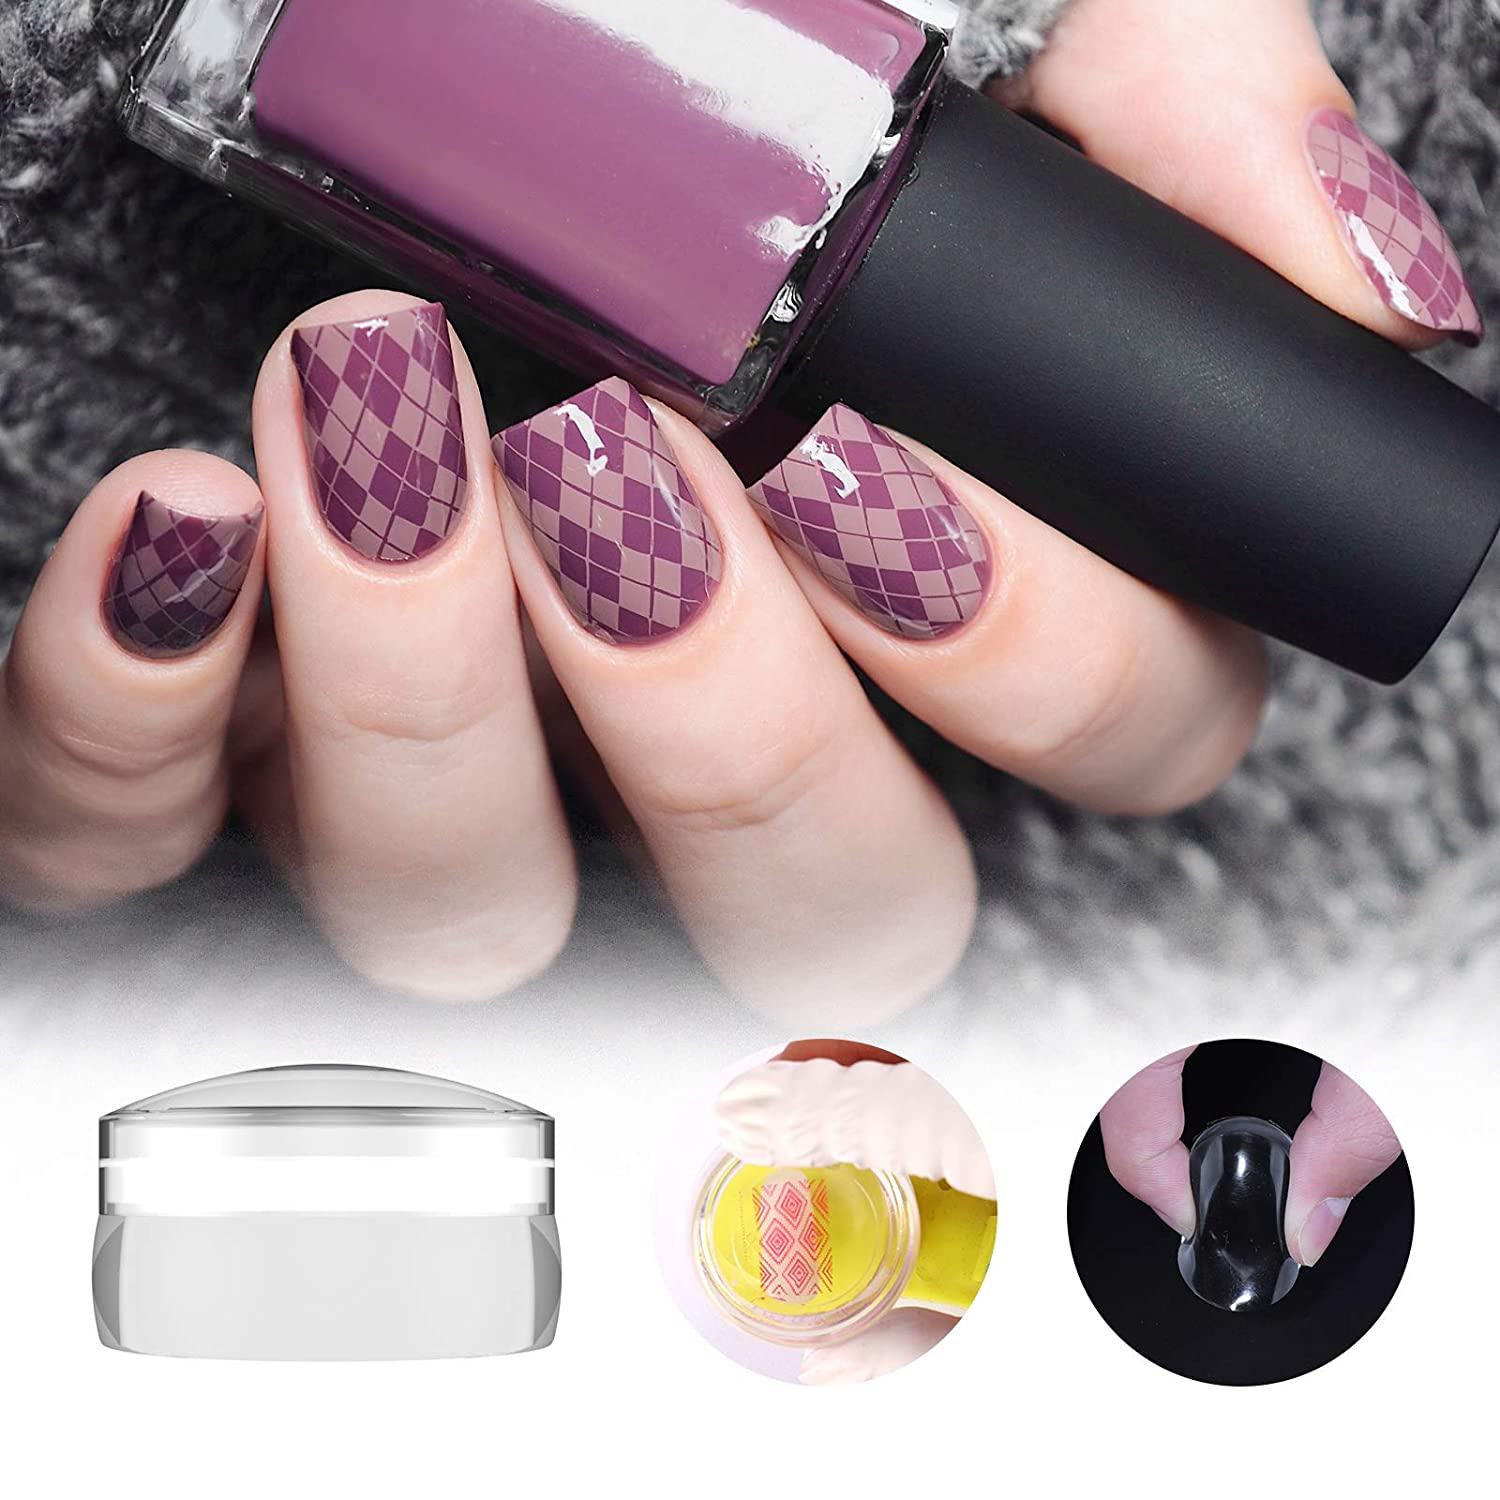 Silicone Nail Art Stamper Refill Head Replacement Manicure Stamping Clear  Jelly | eBay